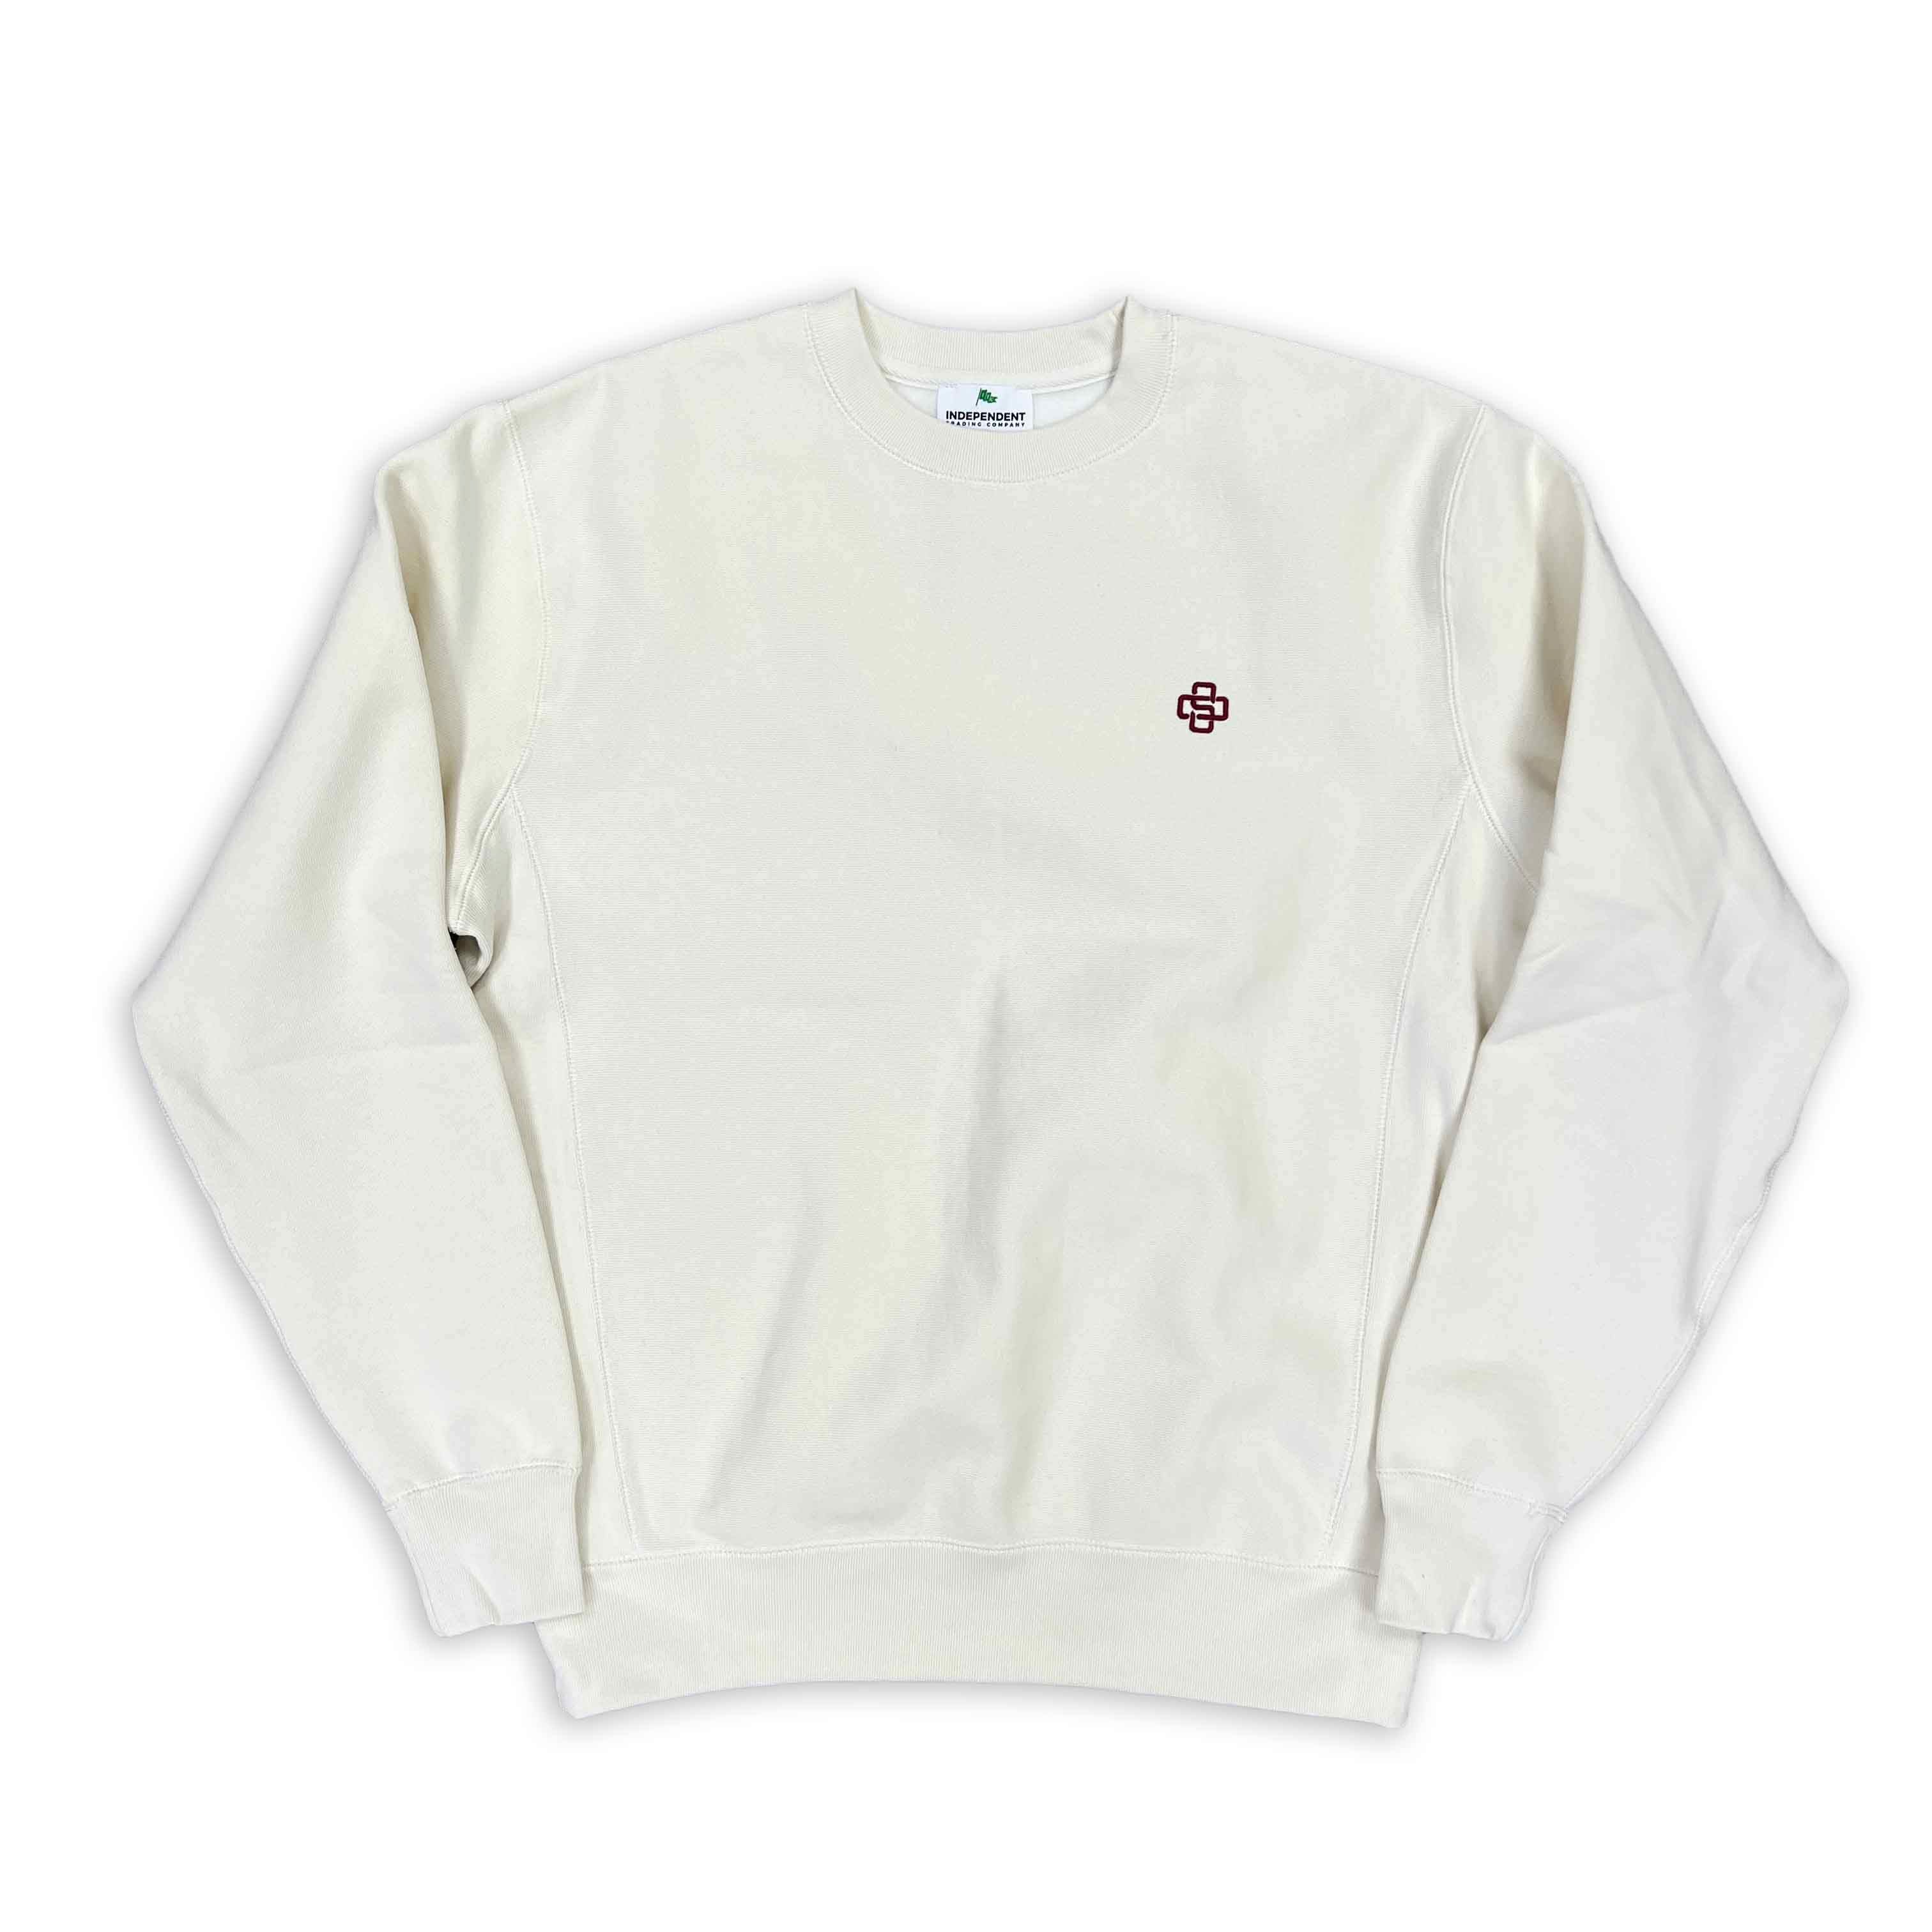 Soled Out Crewneck Sweater "SO+" Cream New Size M